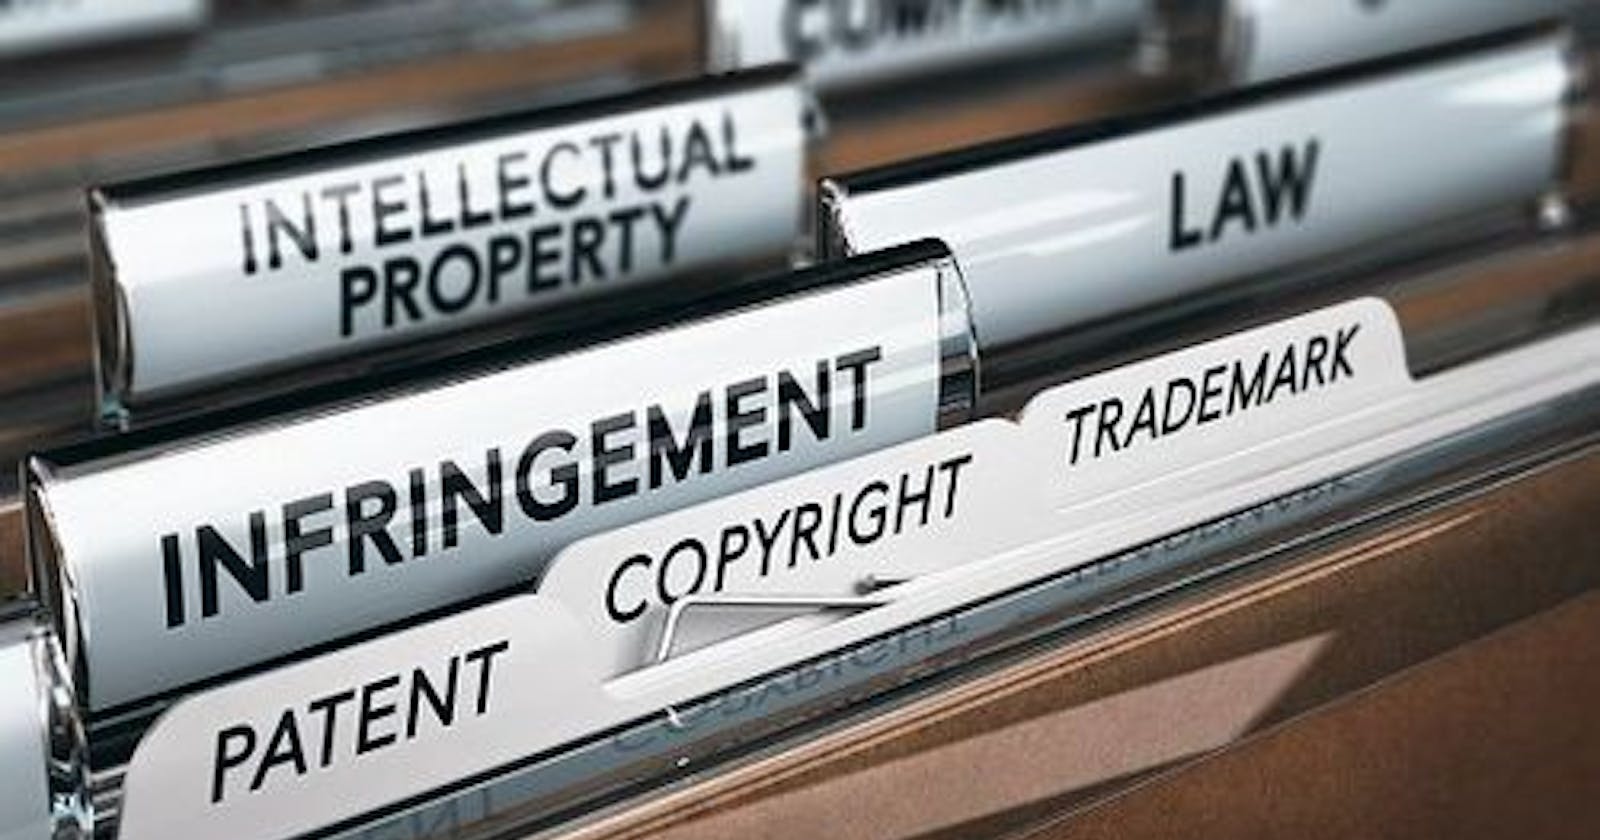 A Smarter Solution to IP Protection: Building an Image-based Trademark Similarity Search System